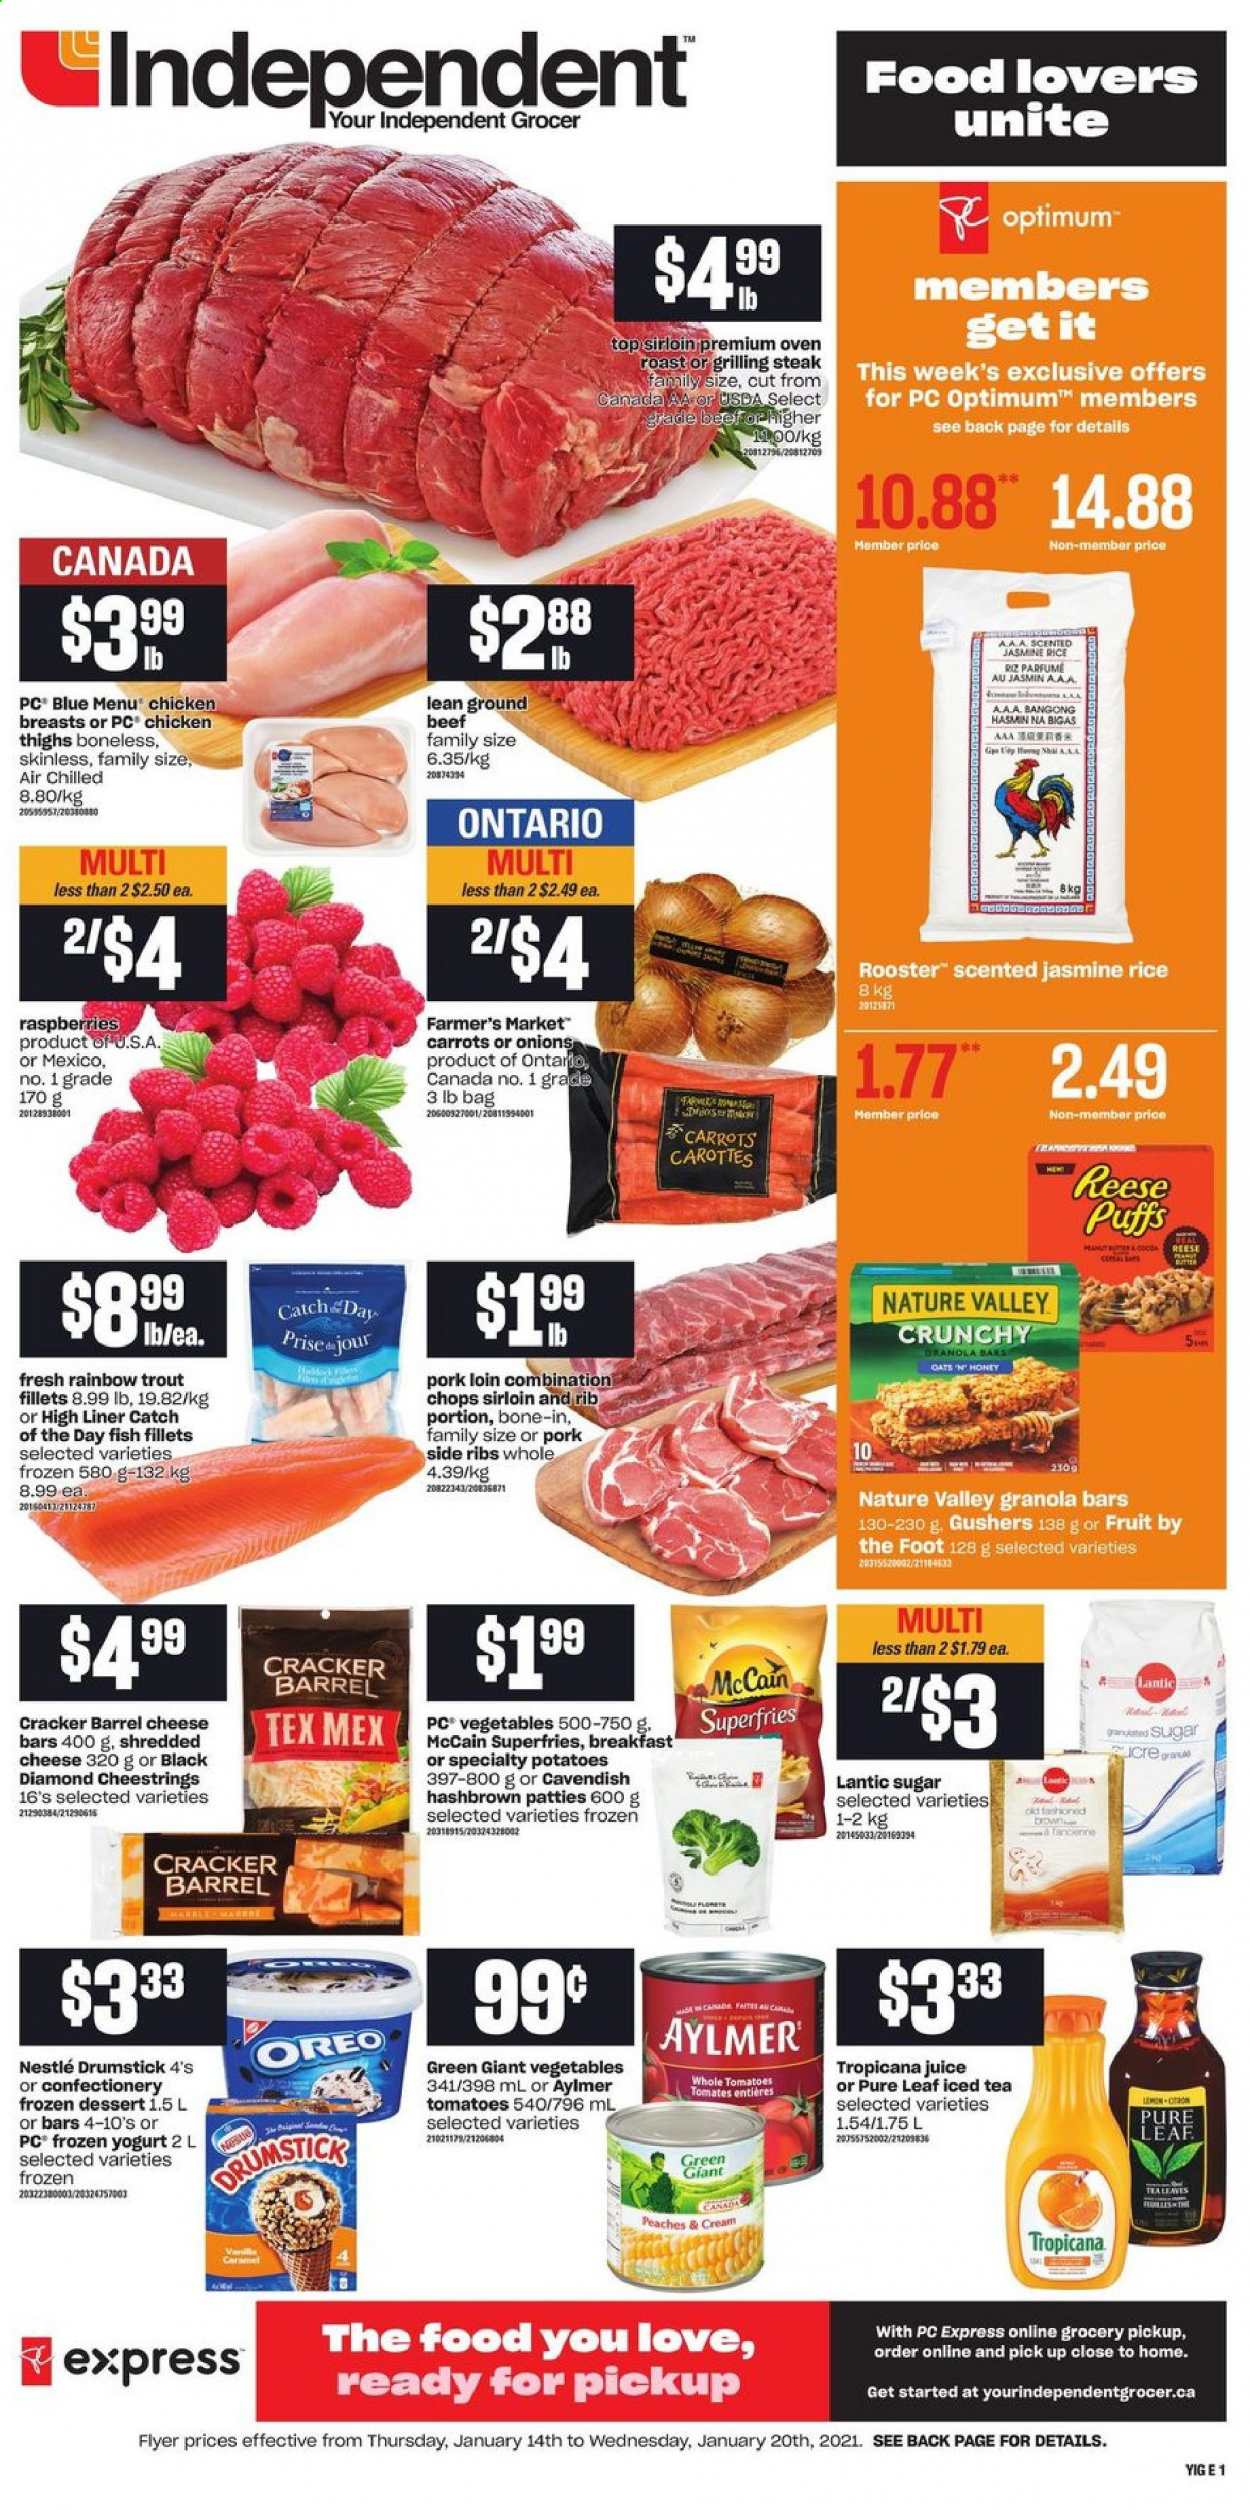 thumbnail - Independent Flyer - January 14, 2021 - January 20, 2021 - Sales products - puffs, carrots, tomatoes, potatoes, onion, peaches, fish fillets, trout, fish, shredded cheese, string cheese, yoghurt, McCain, potato fries, crackers, sugar, granola bar, Nature Valley, rice, jasmine rice, caramel, juice, ice tea, Pure Leaf, chicken breasts, chicken thighs, chicken, beef meat, ground beef, pork loin, pork meat, Optimum, Oreo, Nestlé, steak. Page 1.